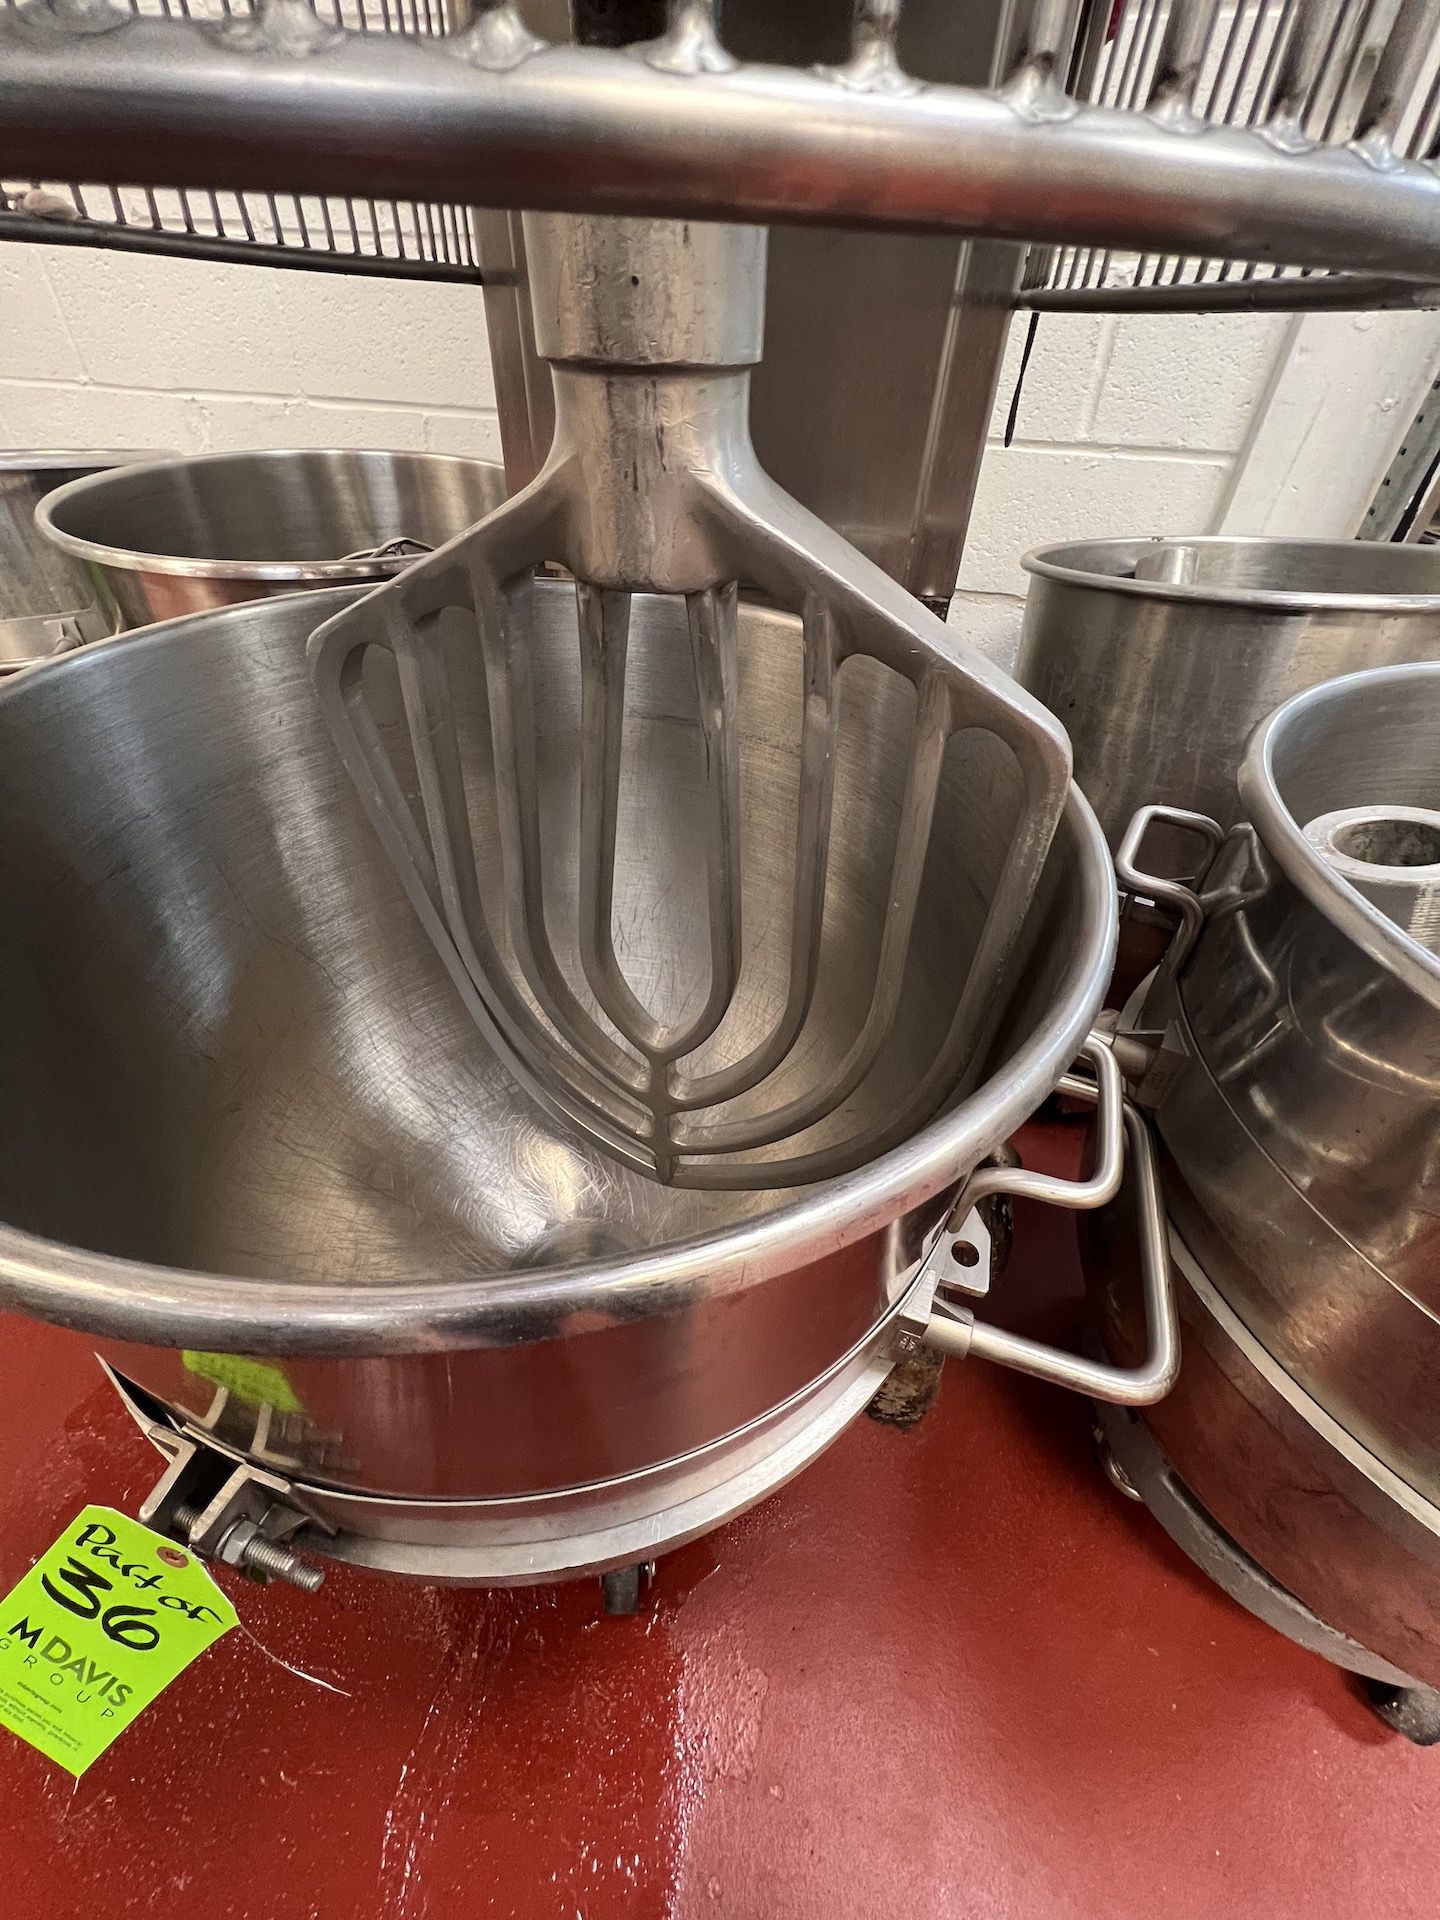 HOBART MIXER, MODEL Q1401, S/N 11-340-0, 140 QUART, WITH BEATER ATTACHMENT, MIXING BOWL AND DOLLY - Image 6 of 8